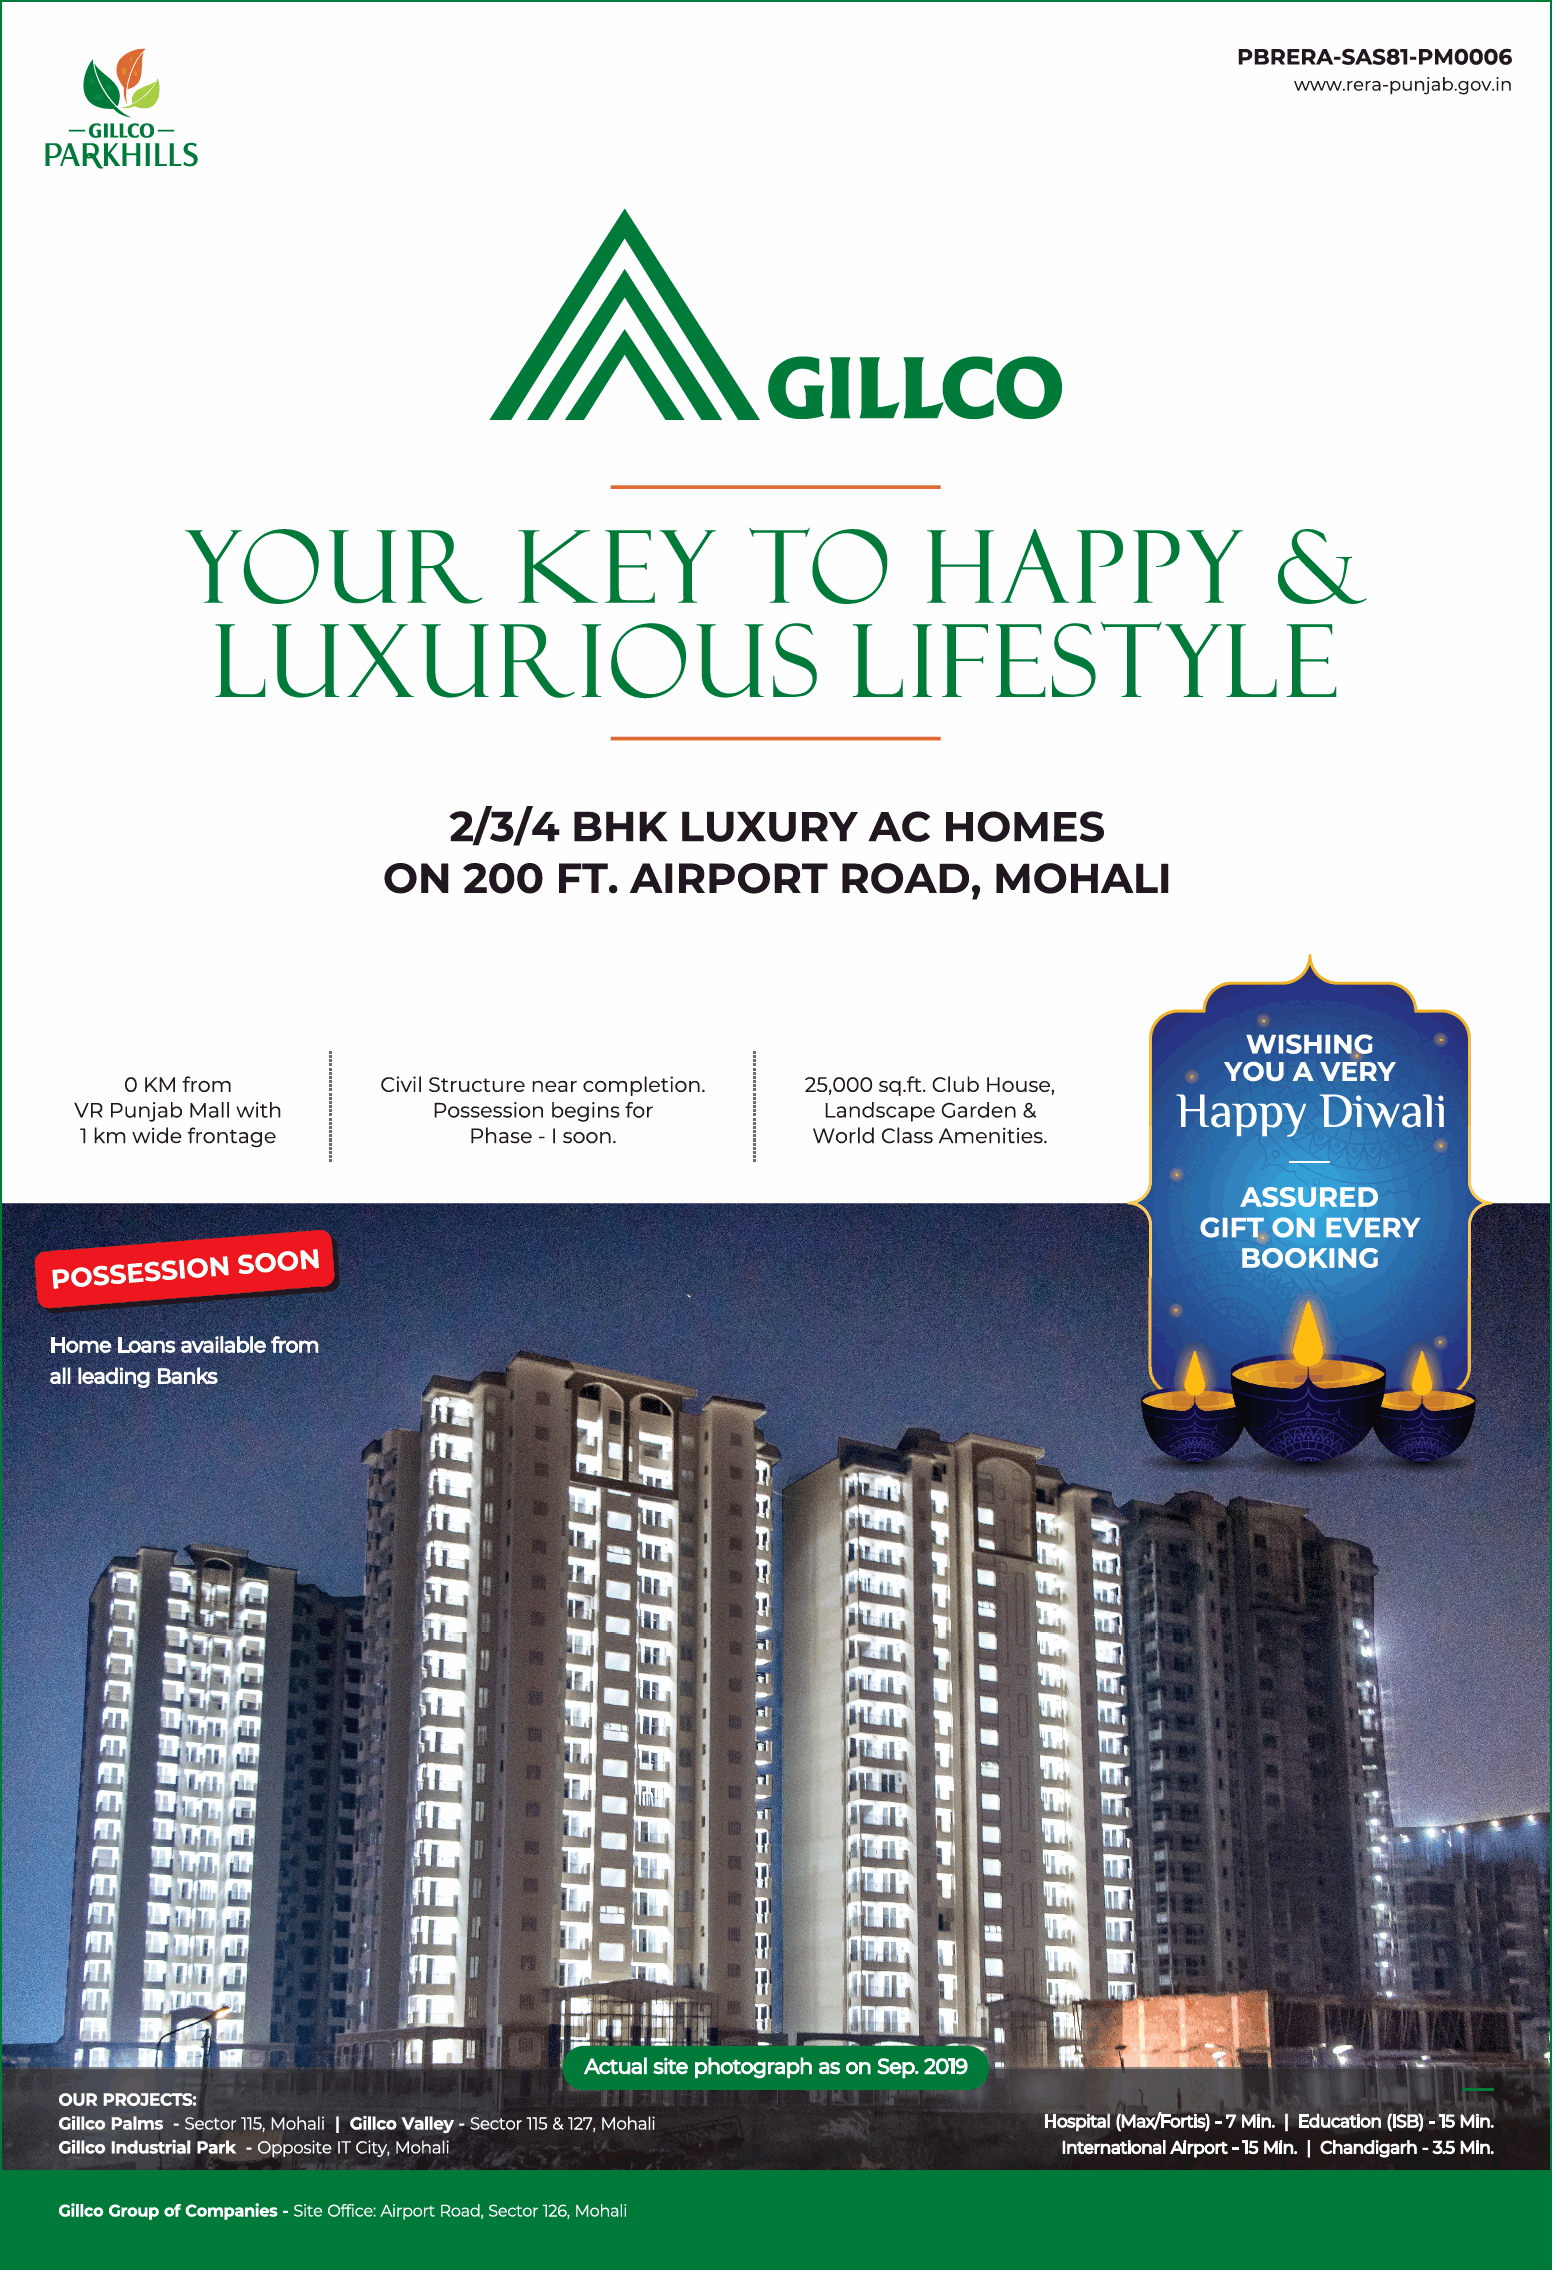 Book 2/3/4 BHK luxury ac homes at Gillco Parkhills in 200 ft. Airport Road, Mohali Update